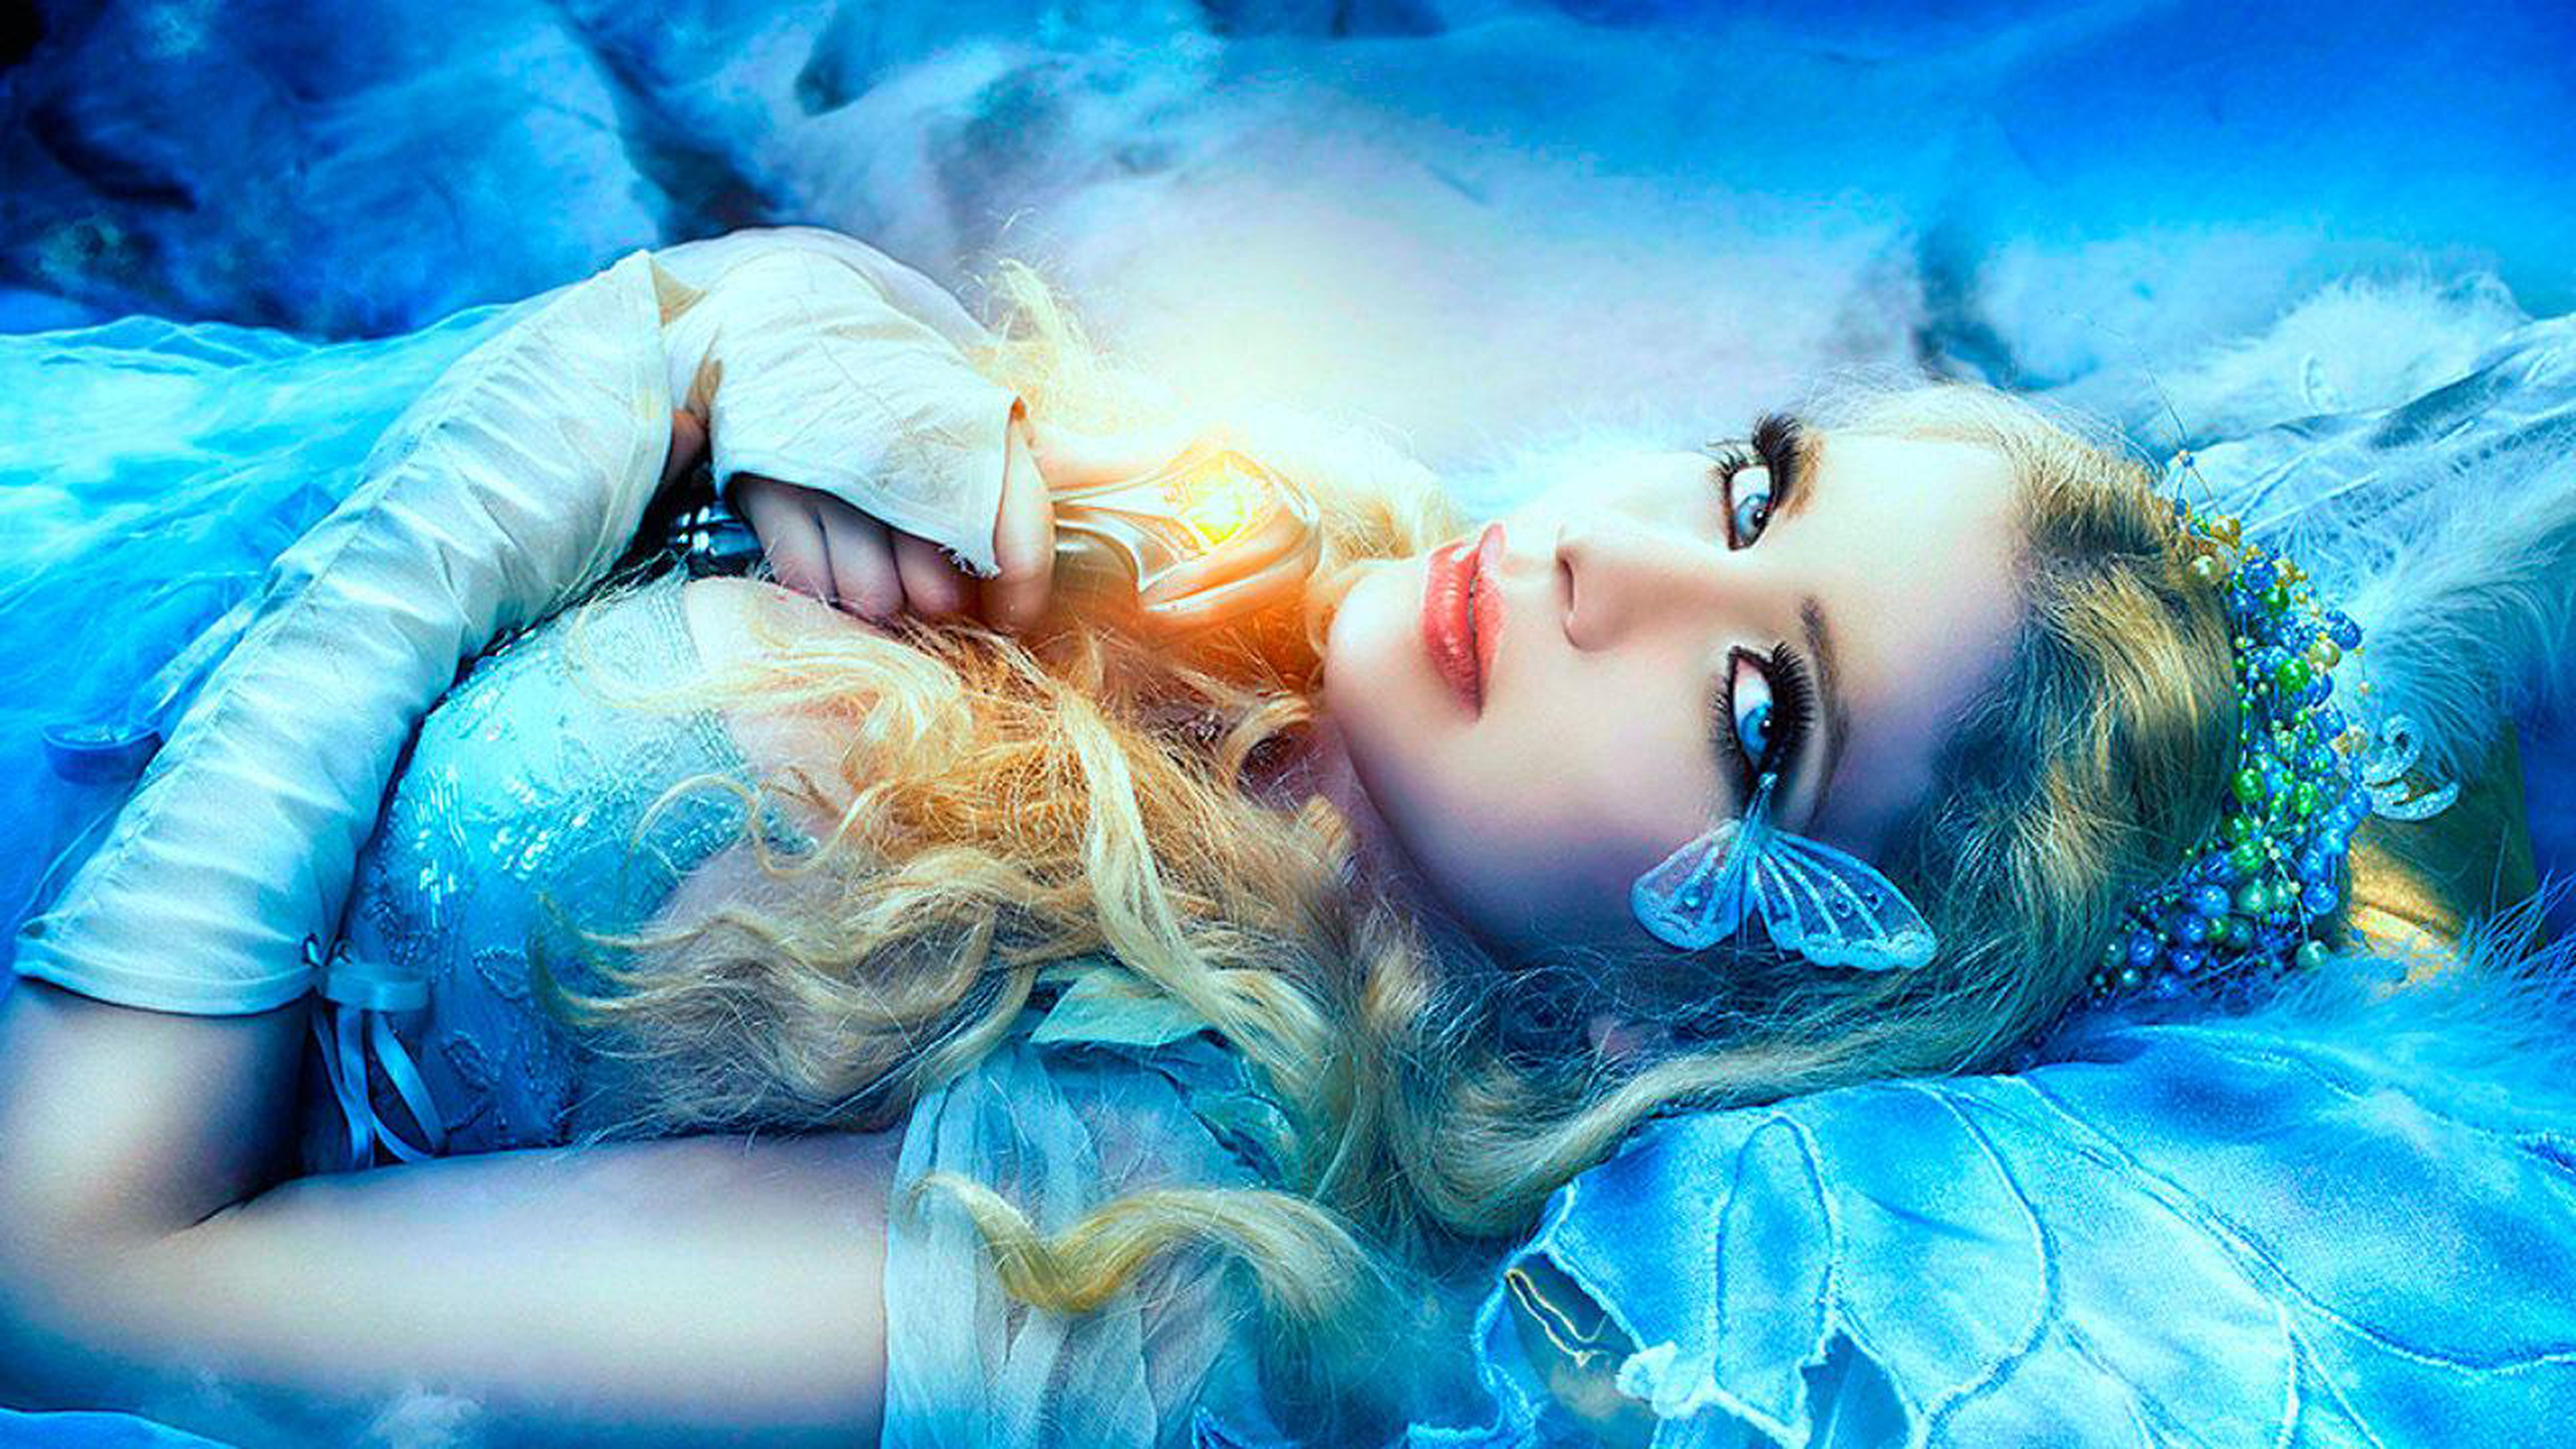 Beautiful Blue Girl With Blue Eyes And Red Lips Fantasy Art Desktop